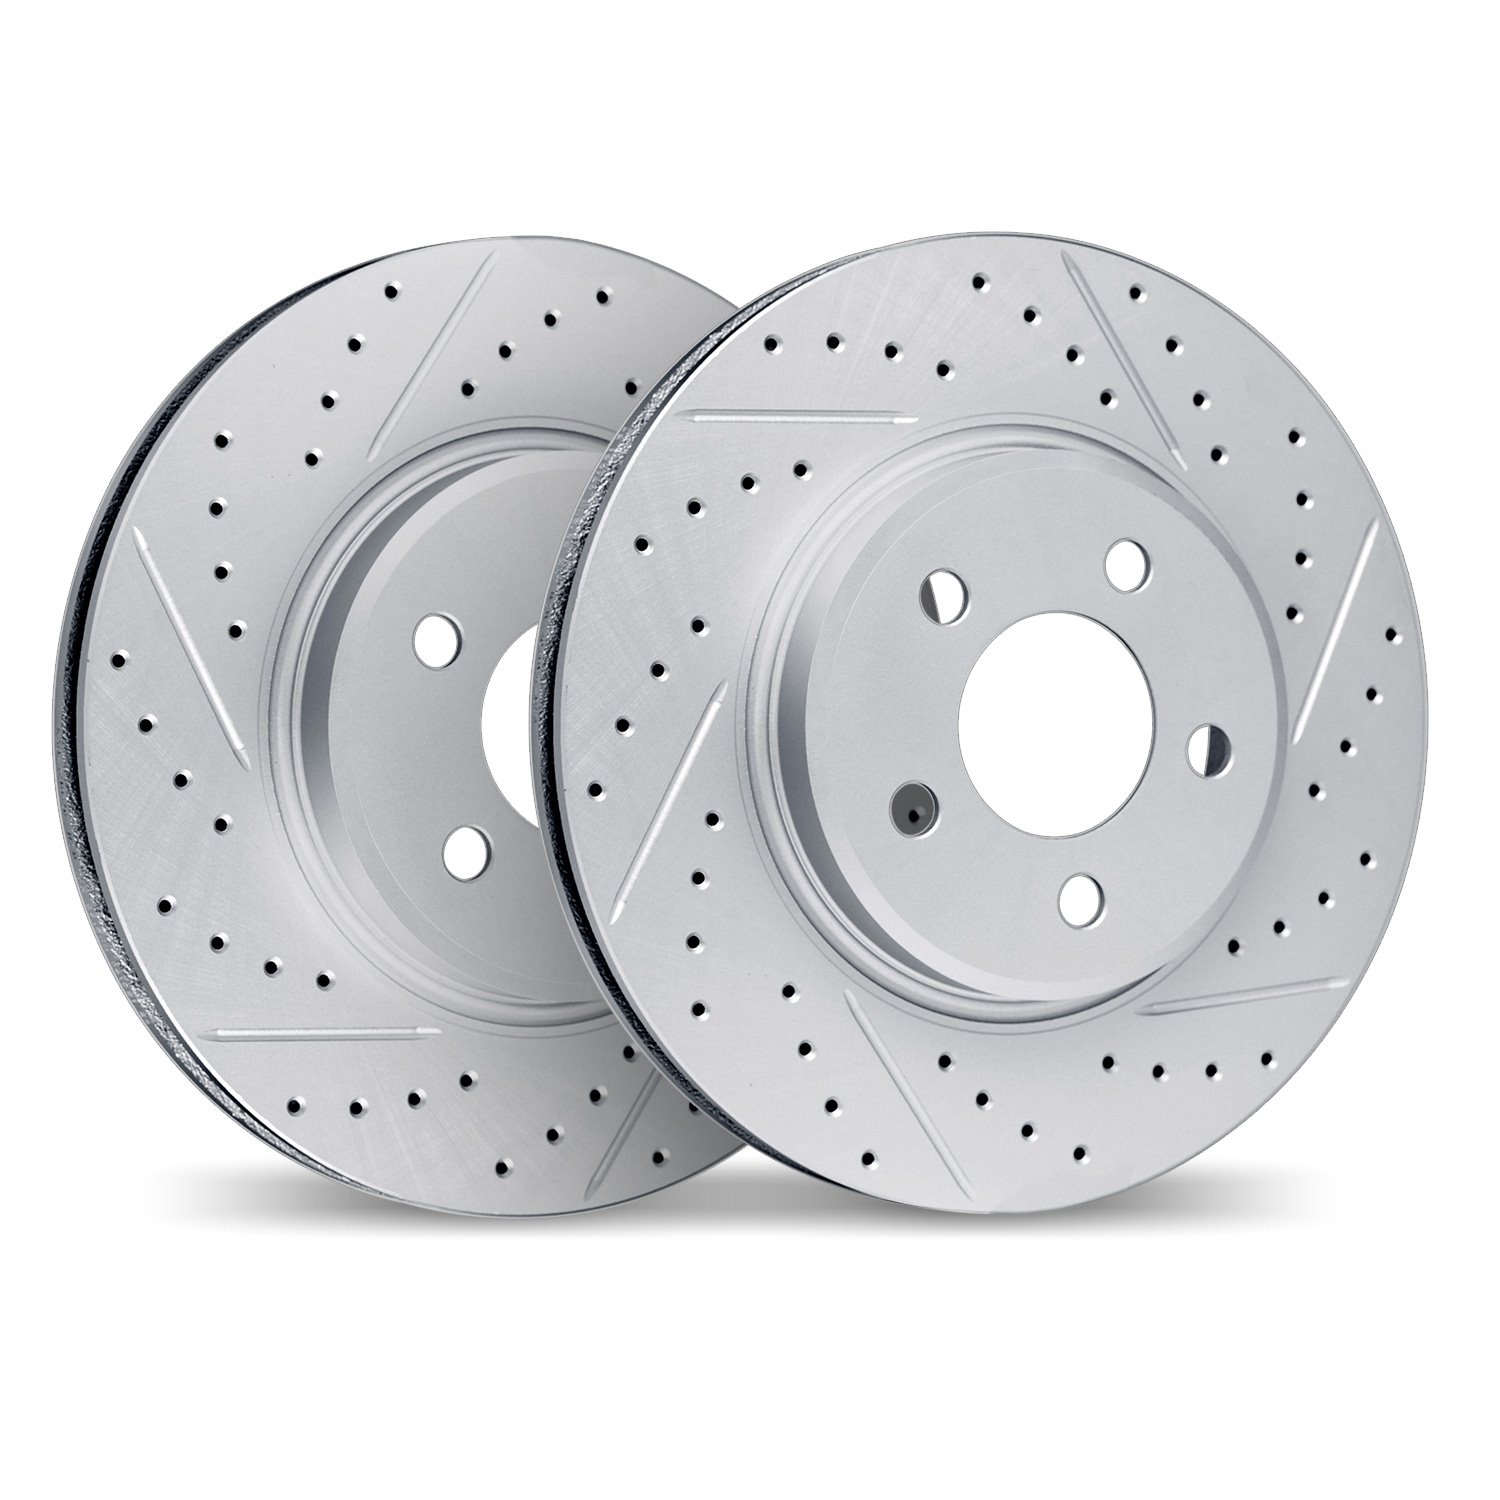 2002-54119 Geoperformance Drilled/Slotted Brake Rotors, 2004-2006 Ford/Lincoln/Mercury/Mazda, Position: Rear